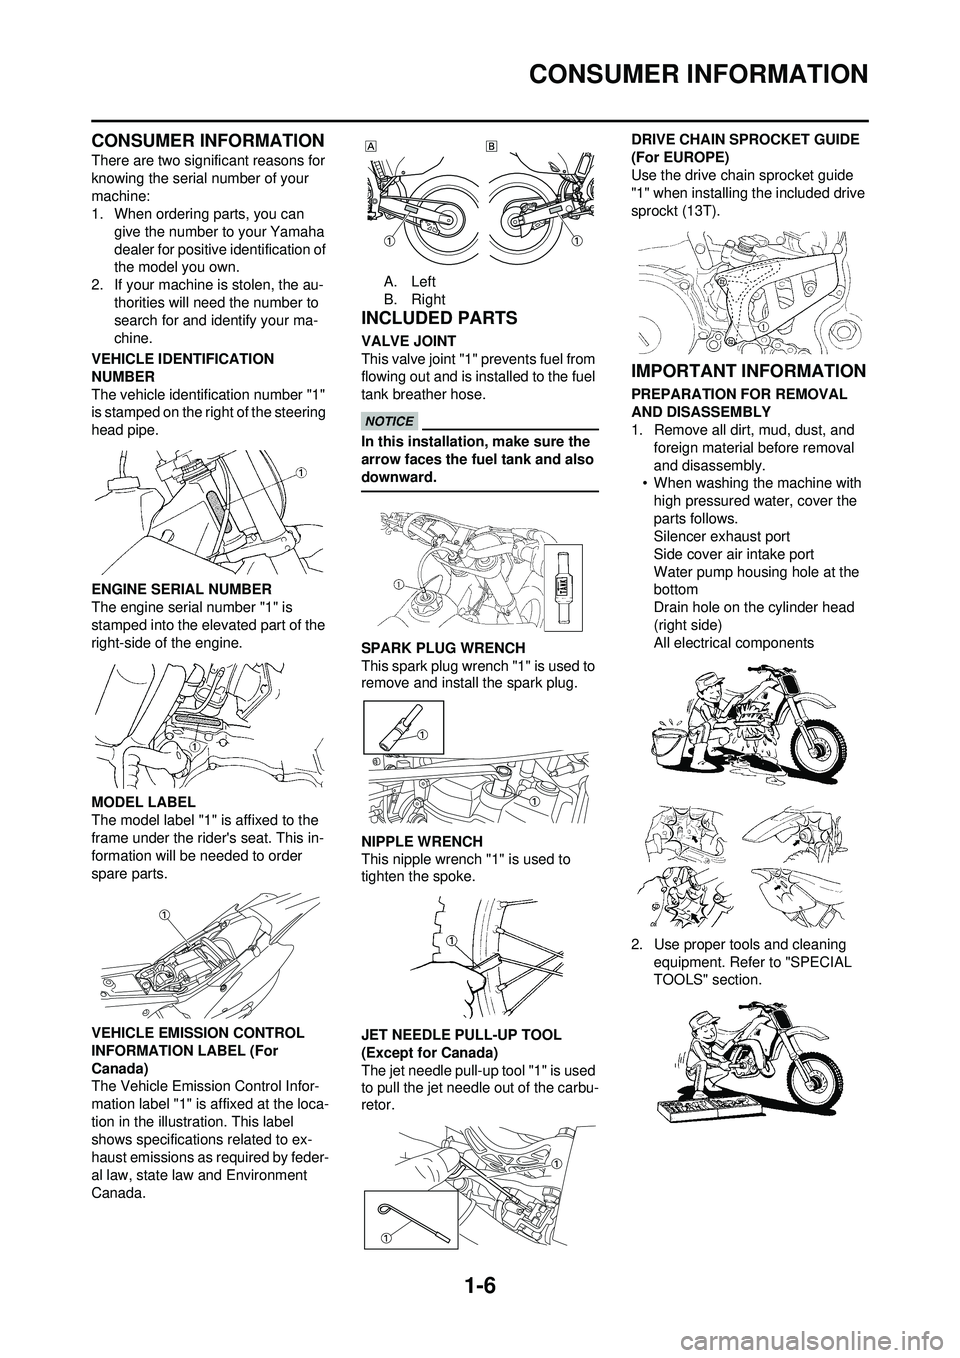 YAMAHA WR 250F 2010 User Guide 1-6
CONSUMER INFORMATION
CONSUMER INFORMATION
There are two significant reasons for 
knowing the serial number of your 
machine:
1. When ordering parts, you can give the number to your Yamaha 
dealer 